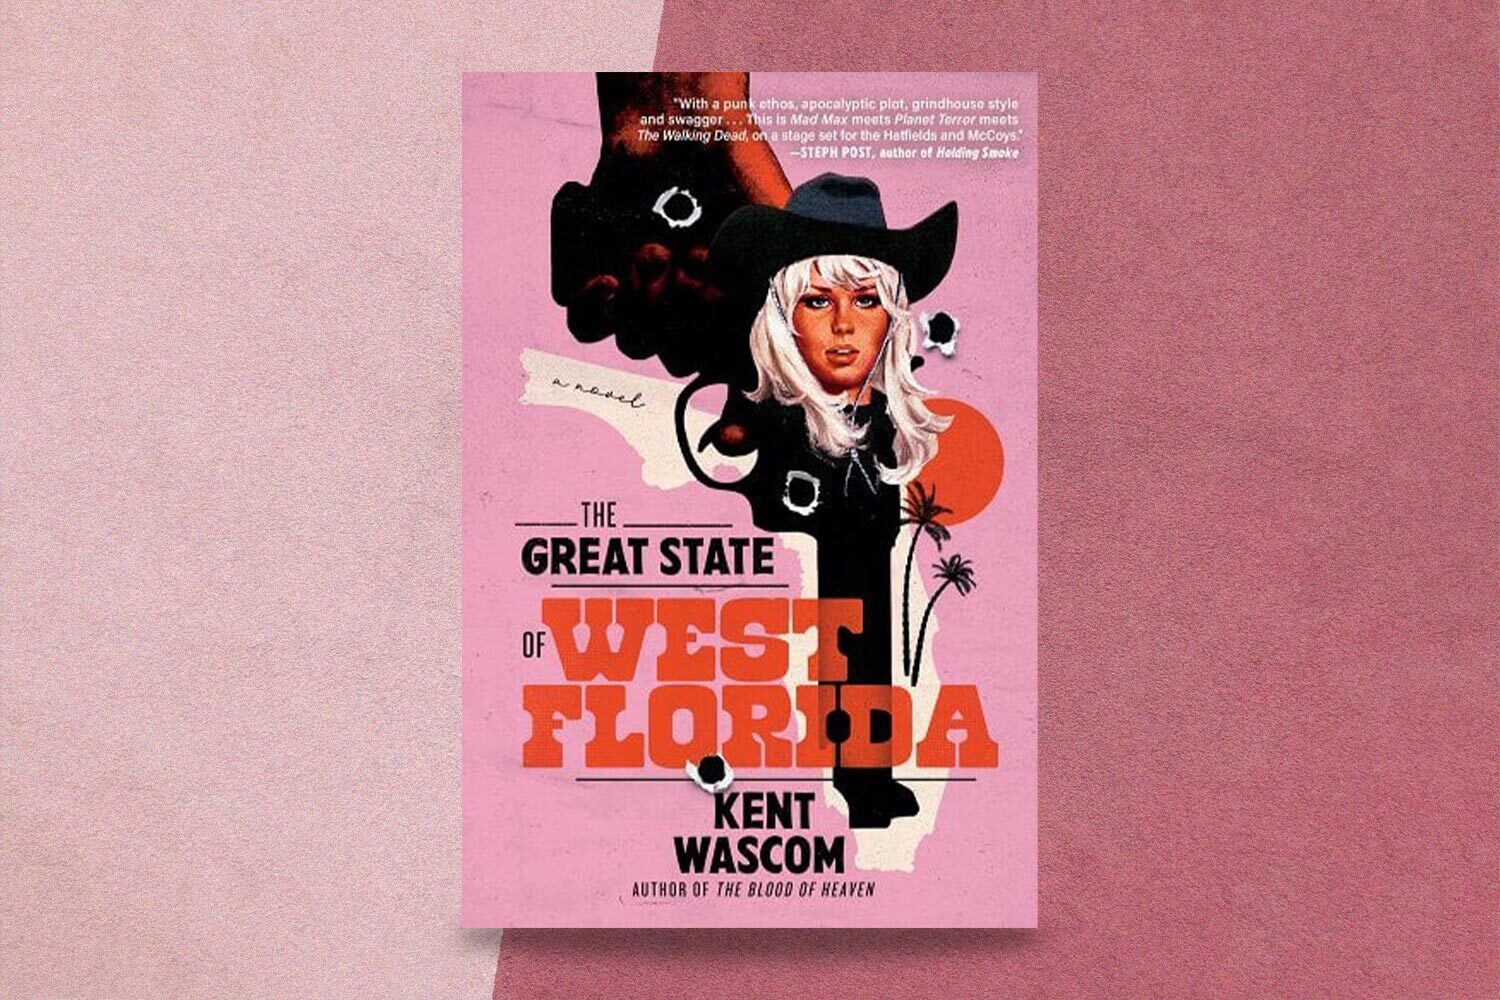 Ken Wascomb, The Great State of West Florida